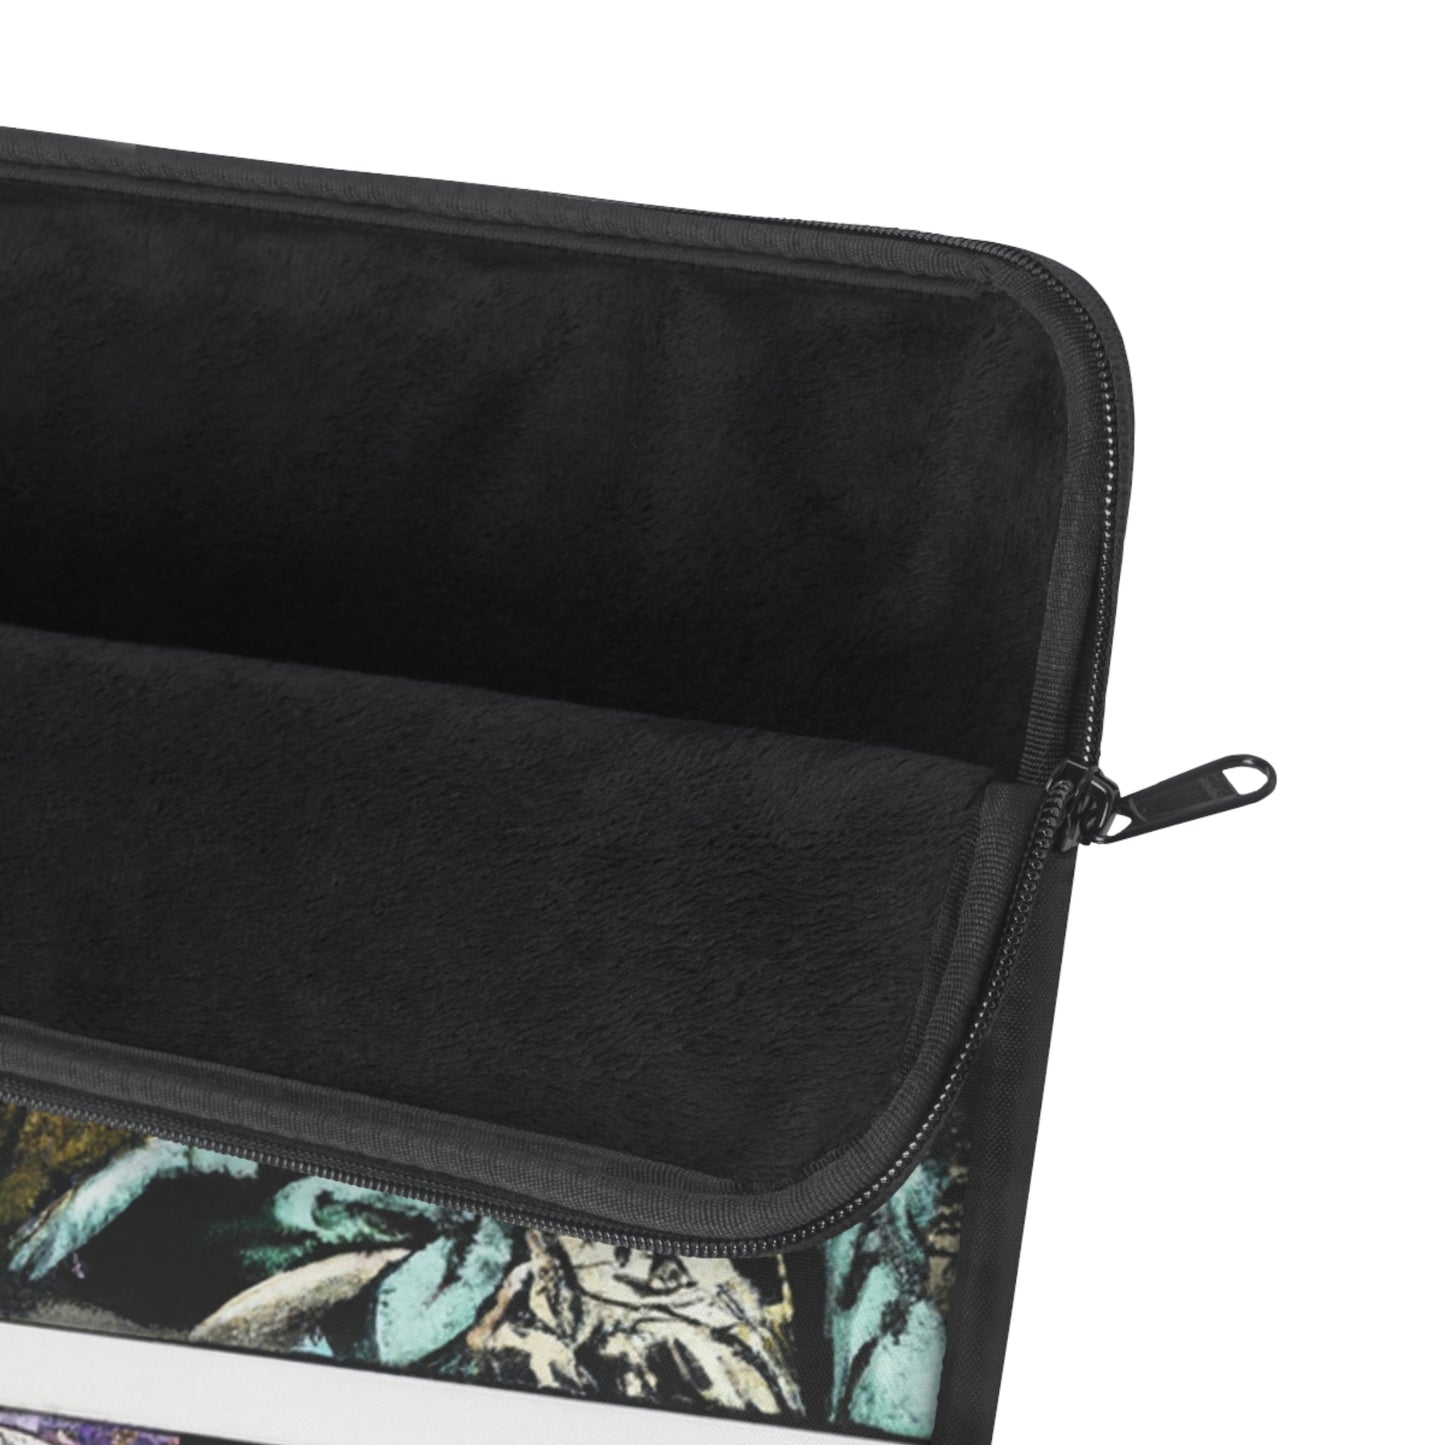 Billy Bopster - Comic Book Collector Laptop Computer Sleeve Storage Case Bag